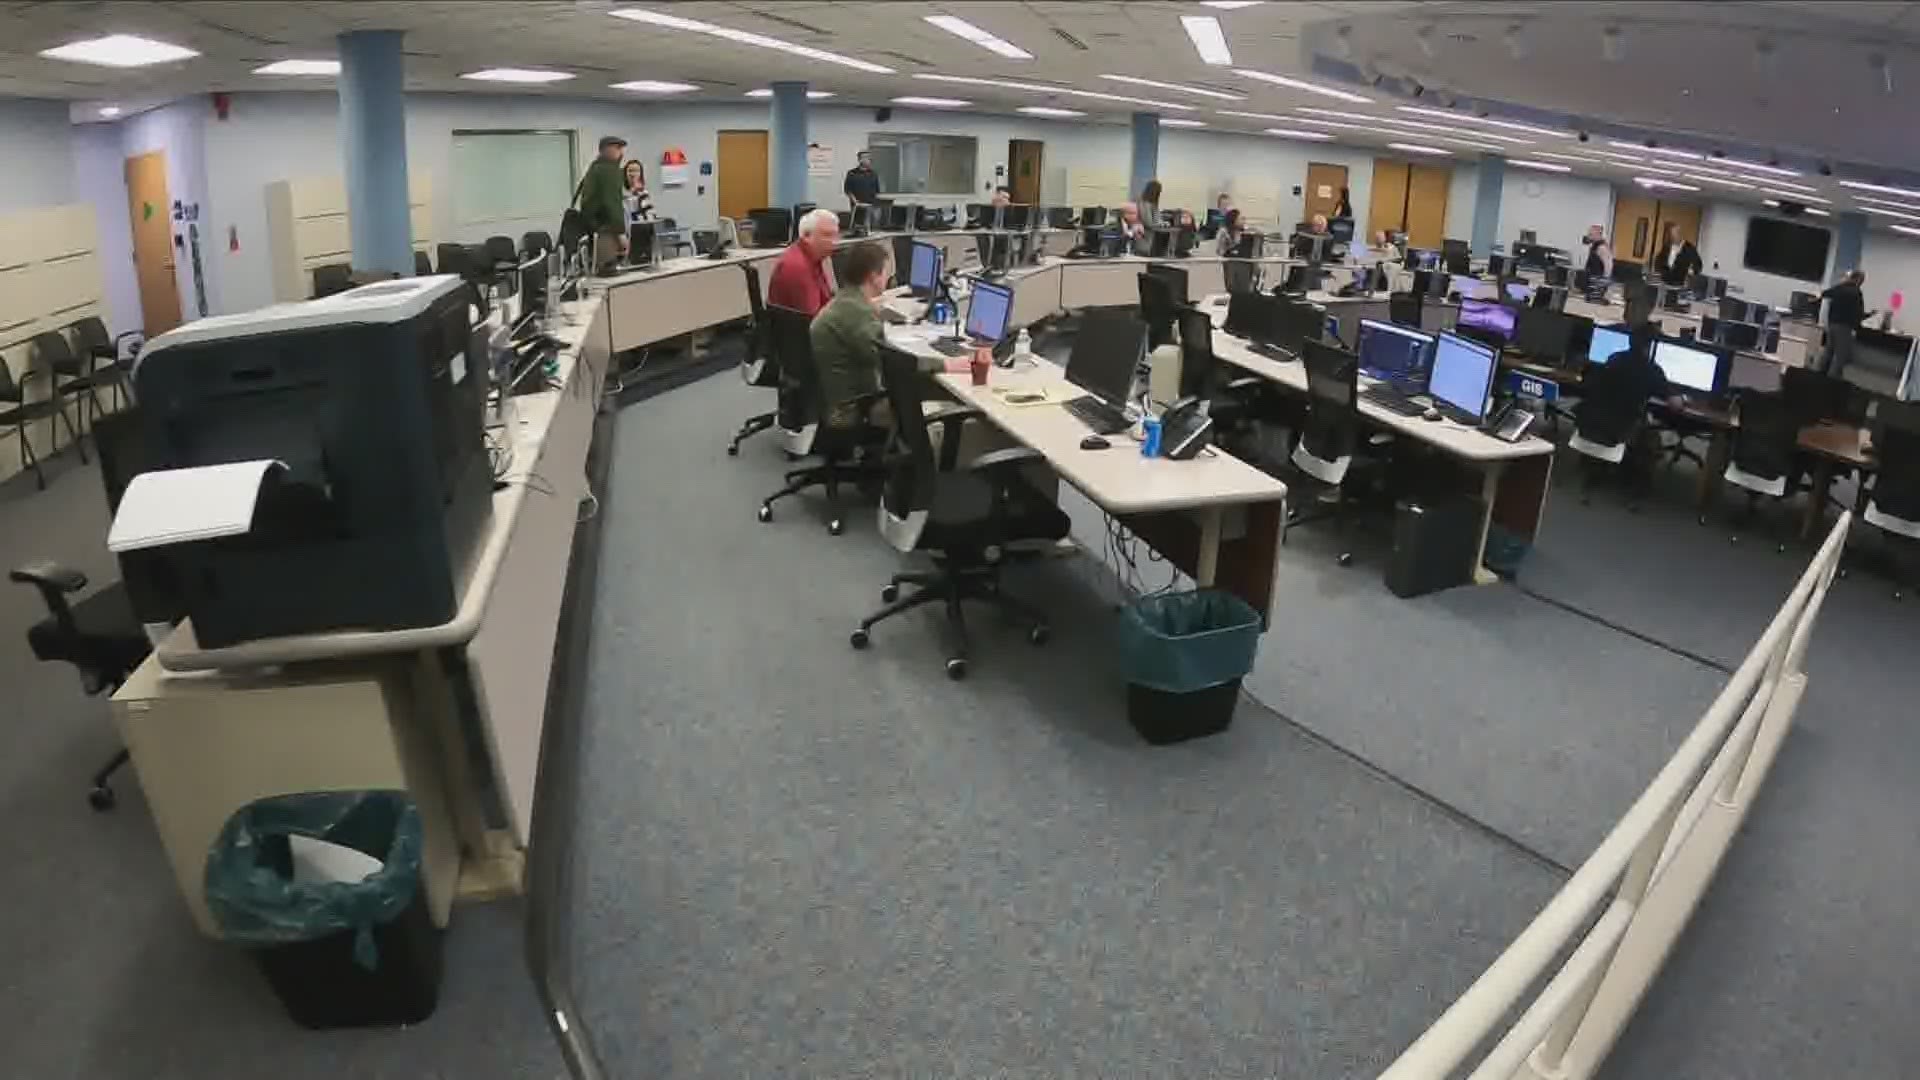 Governor Reynolds fully activated SEOC on Sunday. All department directors were asked to report to this location to talk about their response to COVID-19.